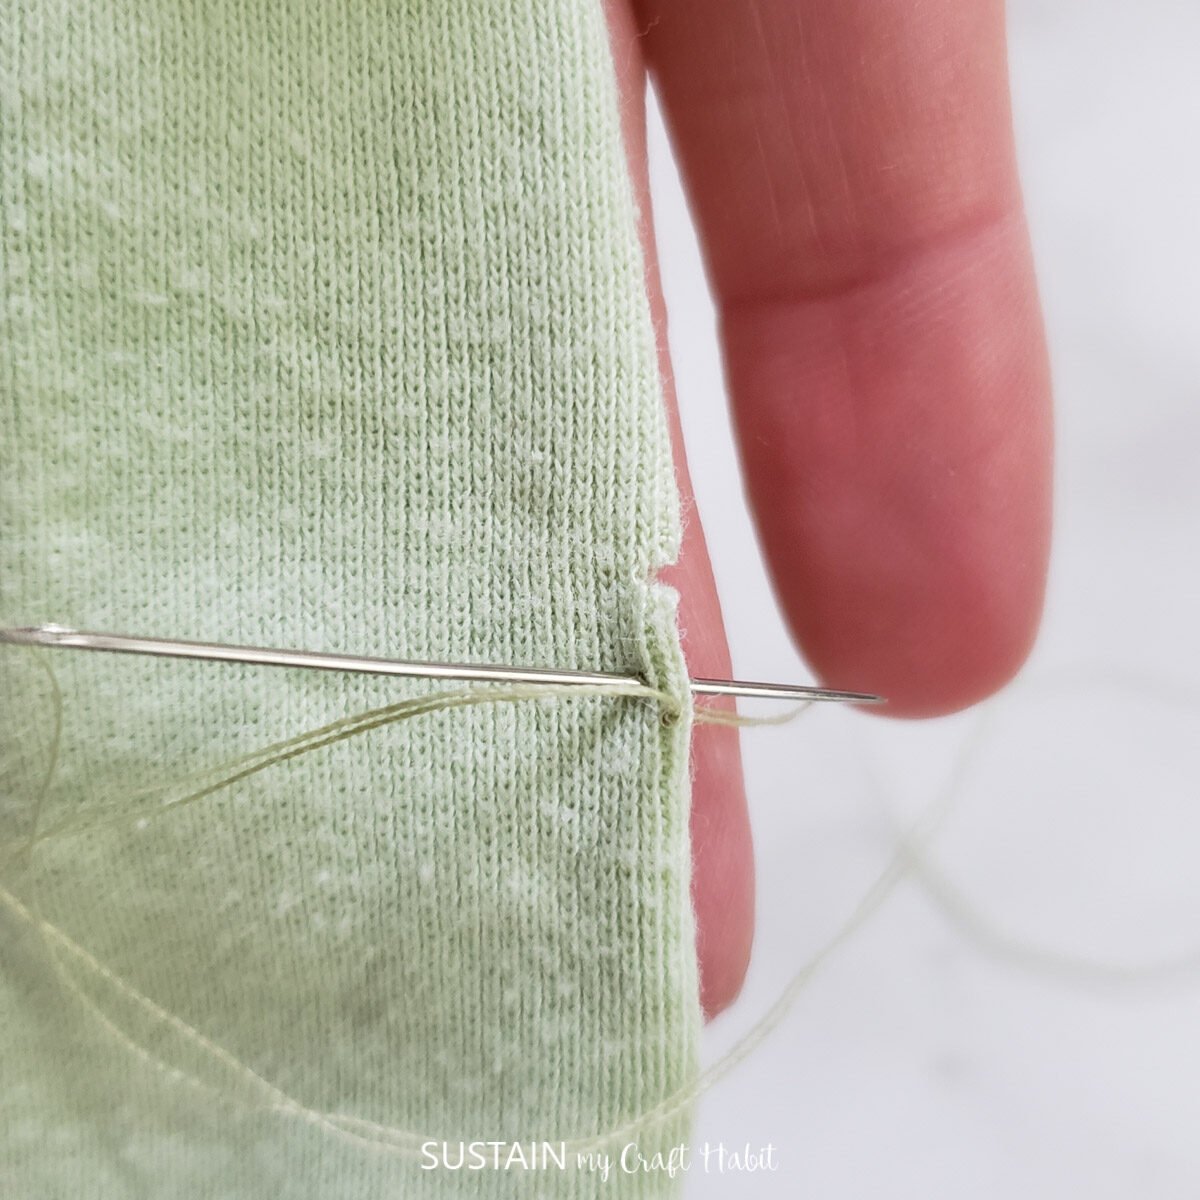 How to Prevent Pinholes in T-Shirts And How To Repair